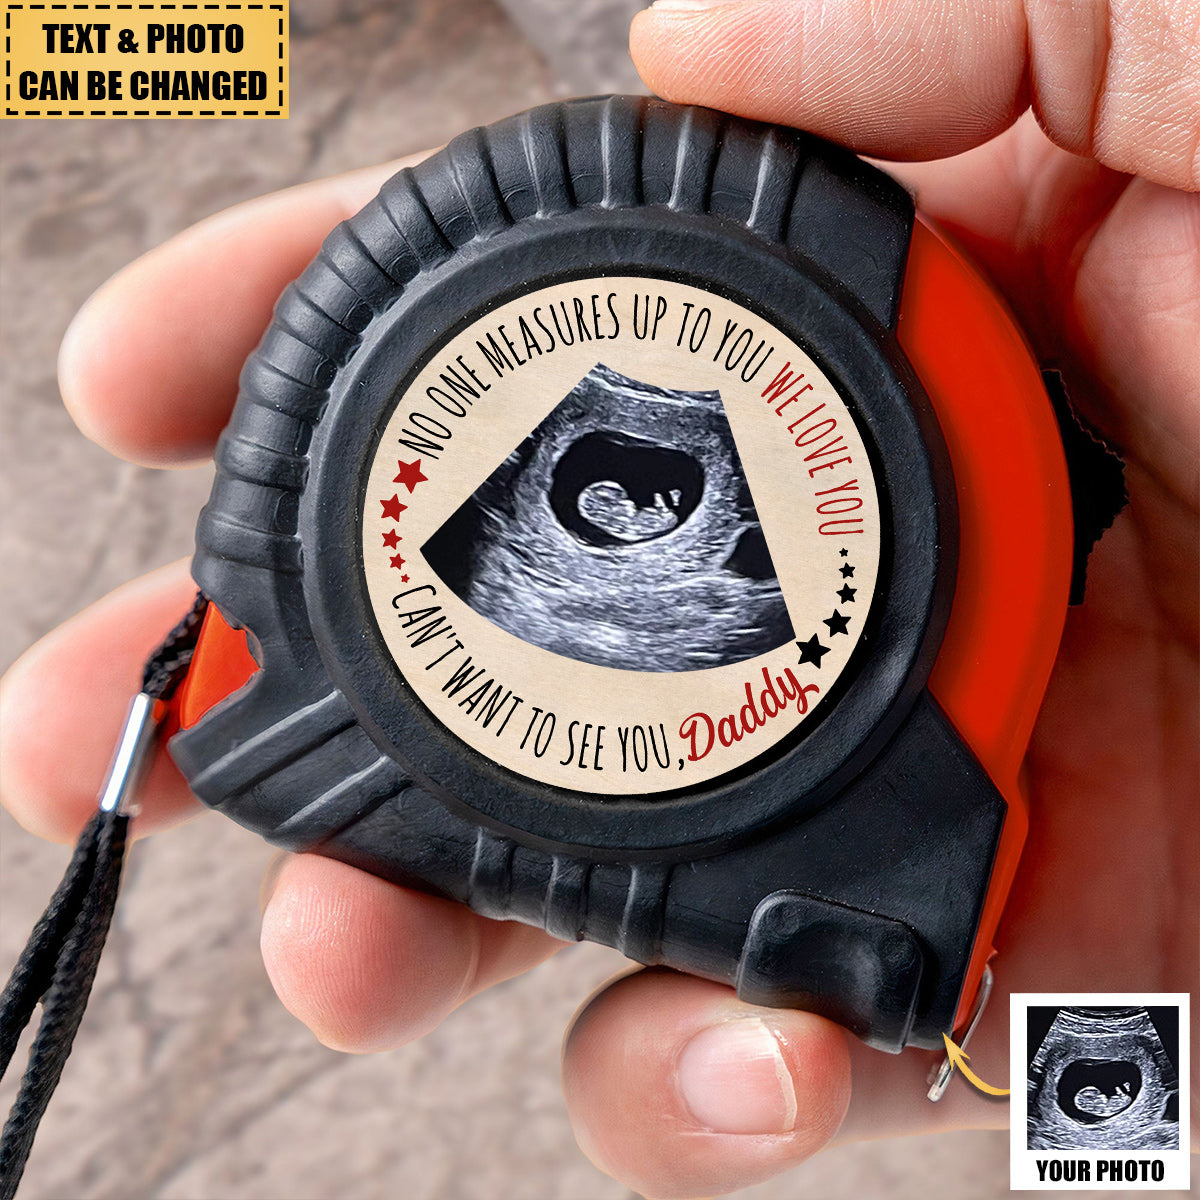 Can't Wait To See You, Daddy - Personalized Tape Measure